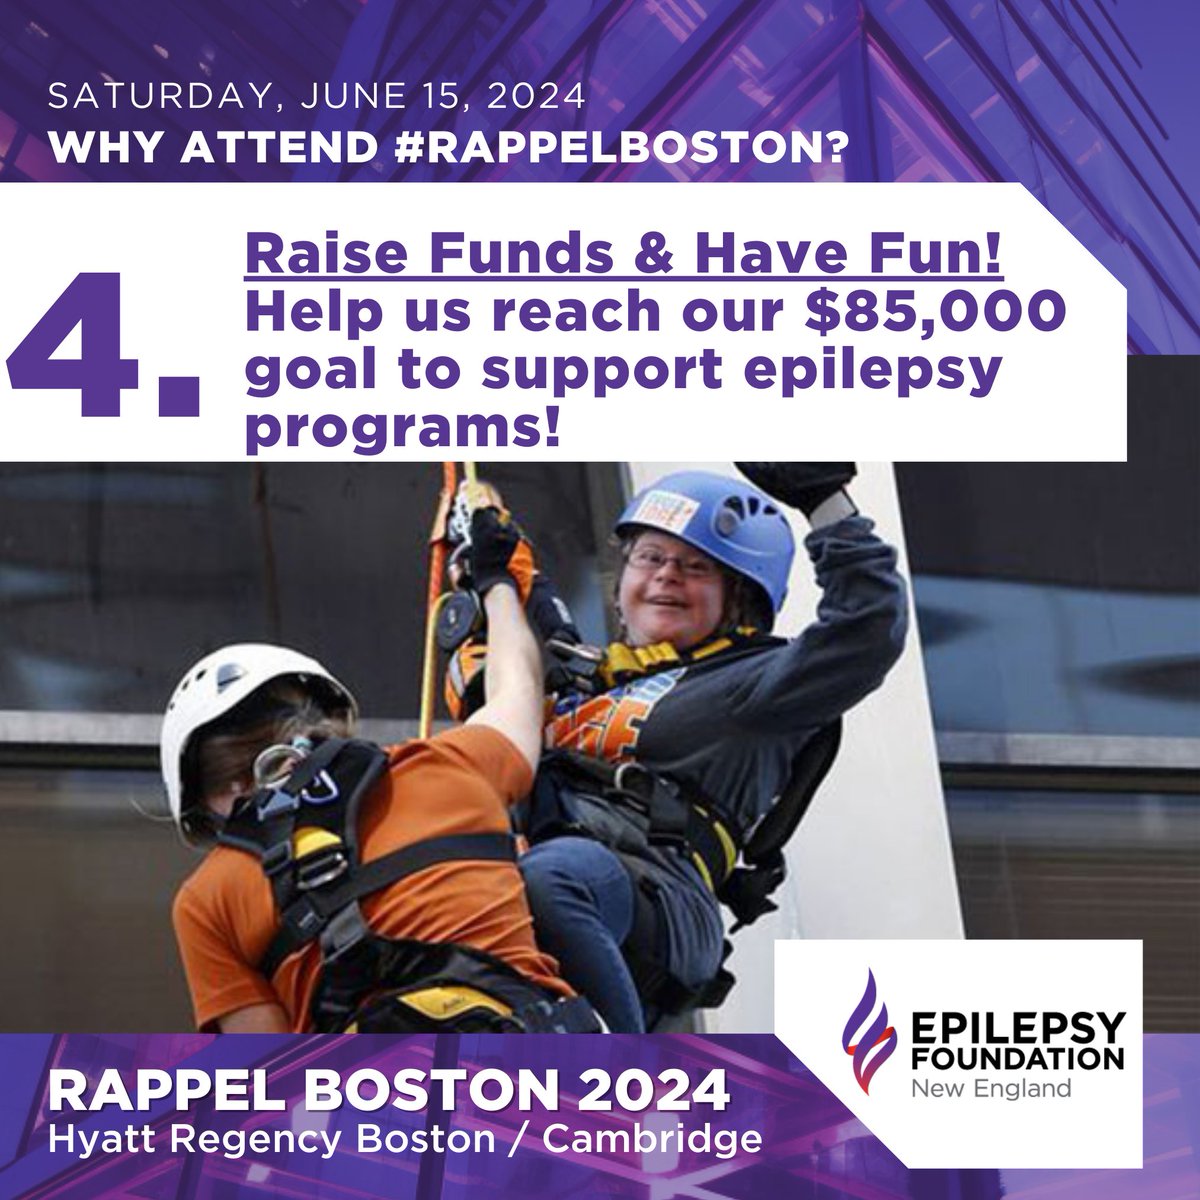 Help us hit our fundraising target! 🎯 Your participation helps support vital epilepsy programs. Join #RappelBoston and make a difference!: bit.ly/3TK4Bch

#Epilepsy #EpilepsyAwareness #EpilepsyWarrior #EpilepsyStrong